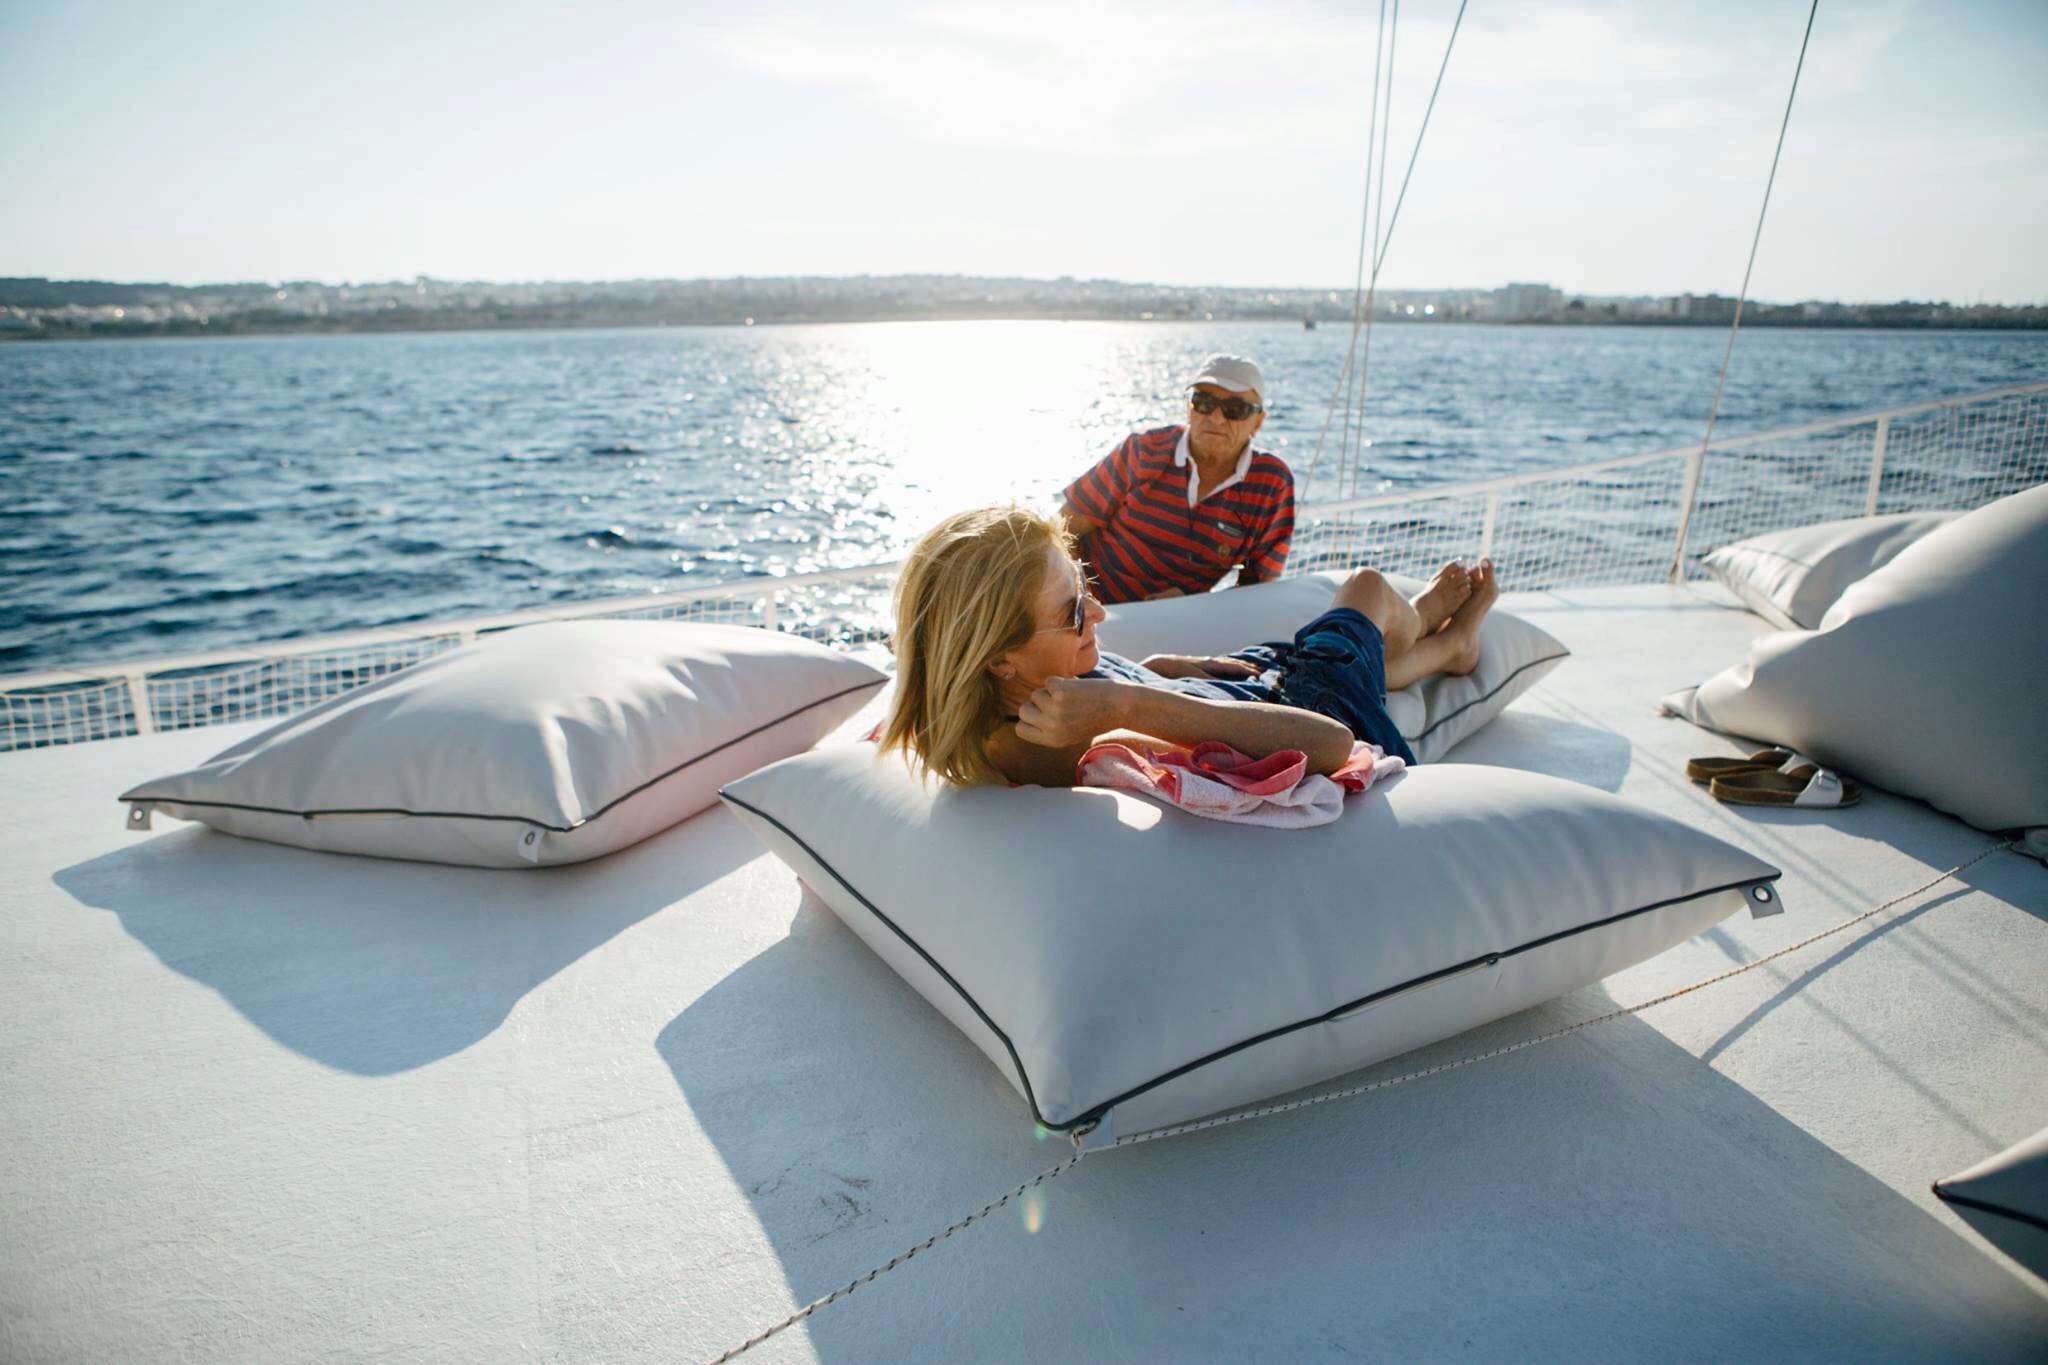 Relax on board of our sailing boat for this Rhodes tour during sunset